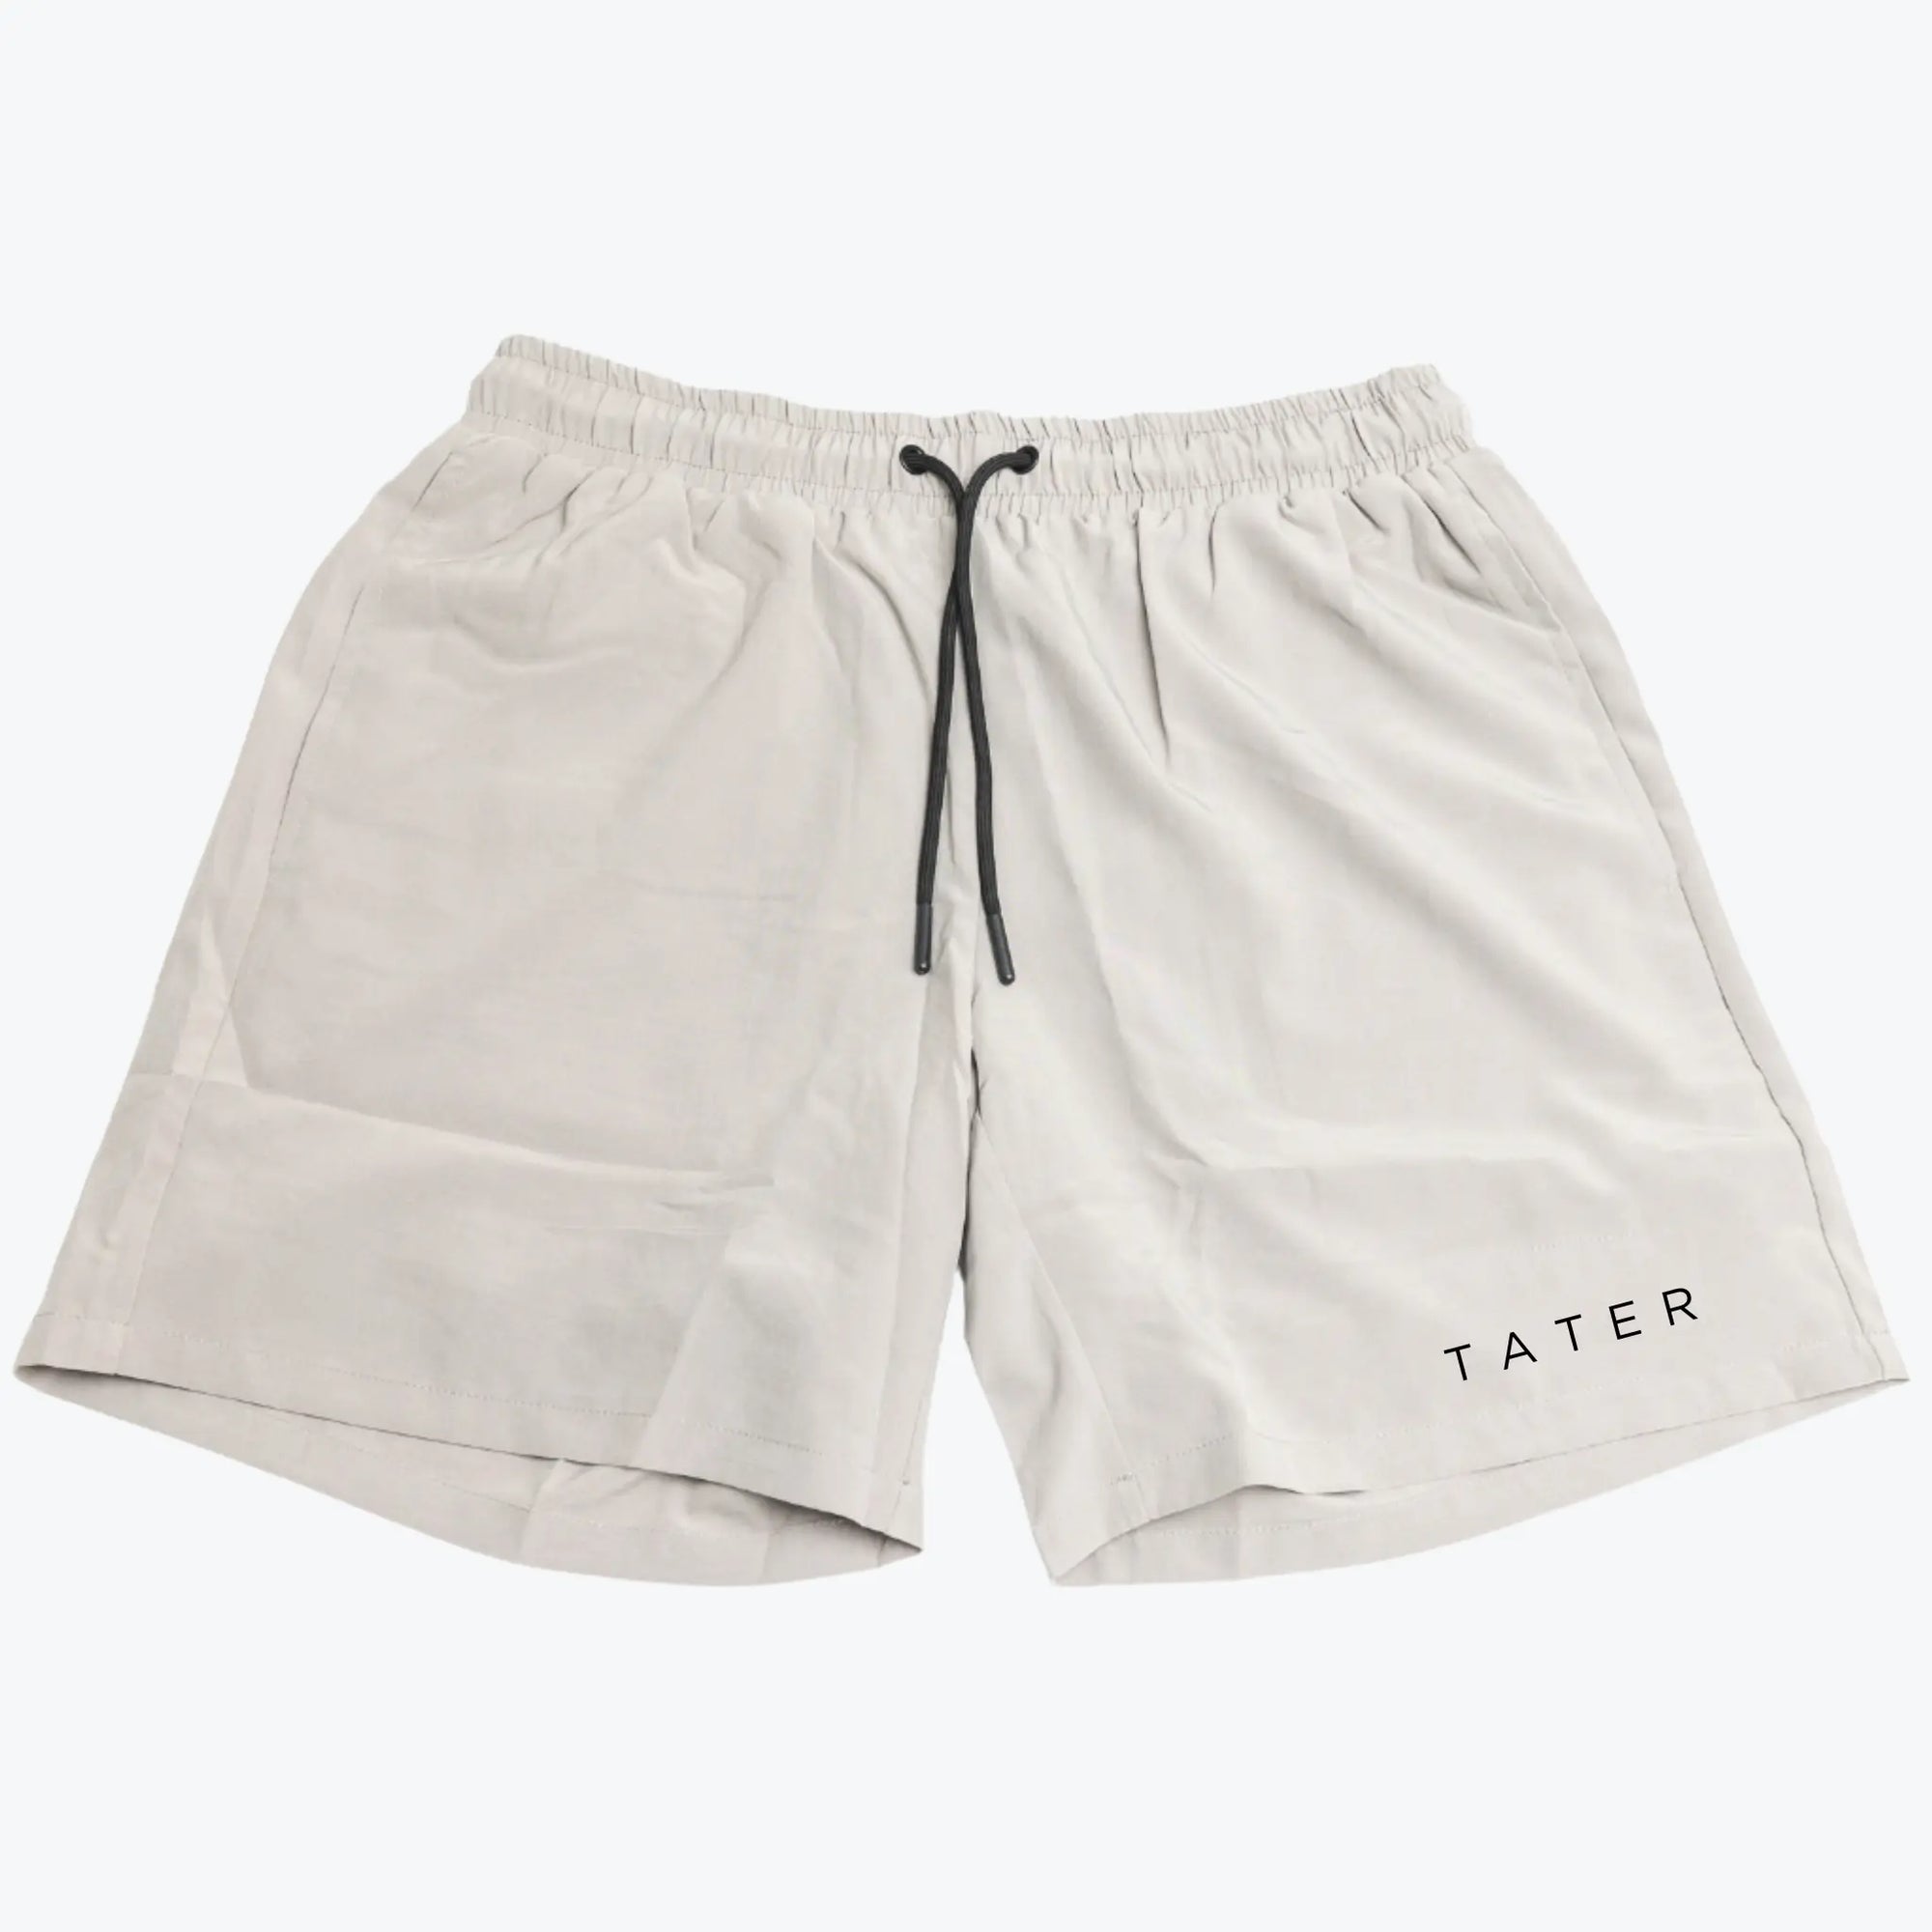 The image features a pair of light grey athletic shorts with a drawstring at the waist. On one leg, the word "TATER" is printed in black, which is the branding of the product. The shorts appear to be designed for physical activity, such as working out or sports practice, given the comfortable and breathable design. The color and minimal branding suggest a versatile piece of athletic wear that could be easily coordinated with other workout gear.